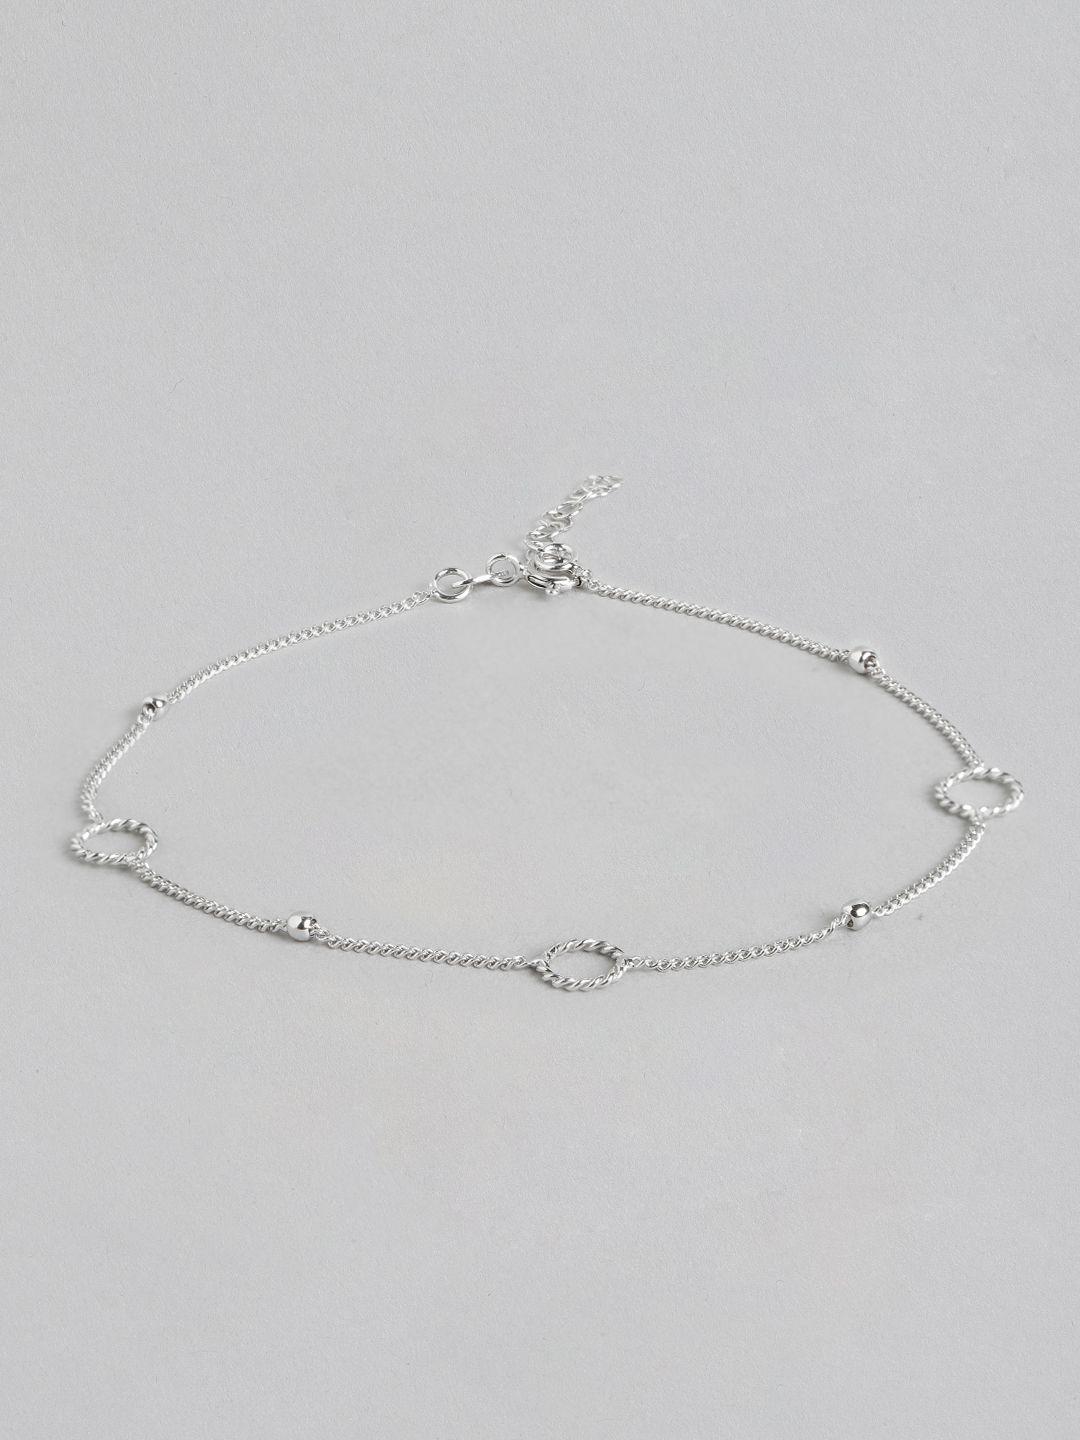 carlton london 925 sterling silver rhodium plated adjustable fancy anklet